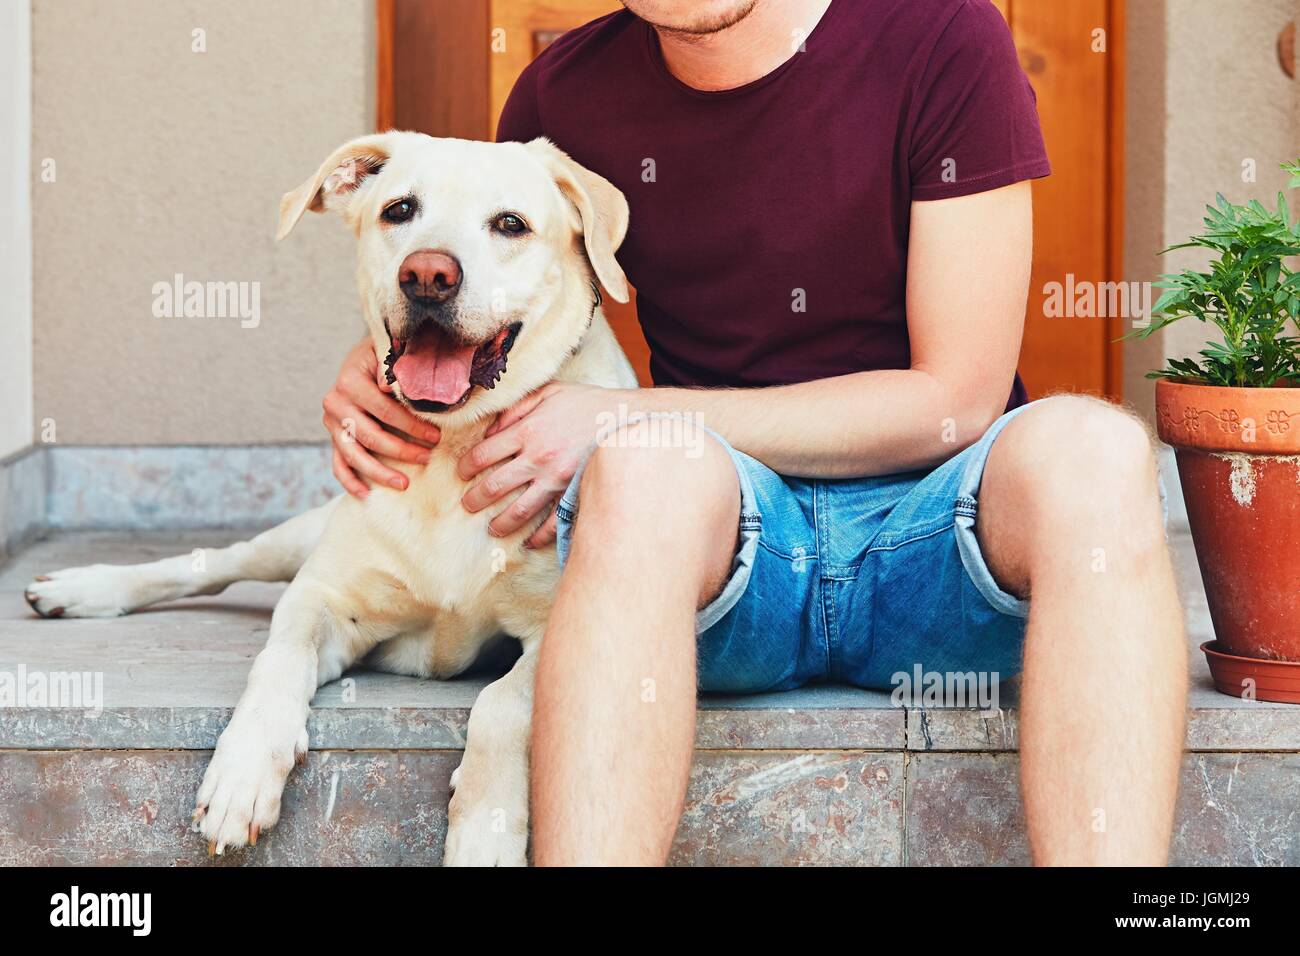 Happy labrador retriever. Young man resting with old dog on the stairs in front of the house. Stock Photo